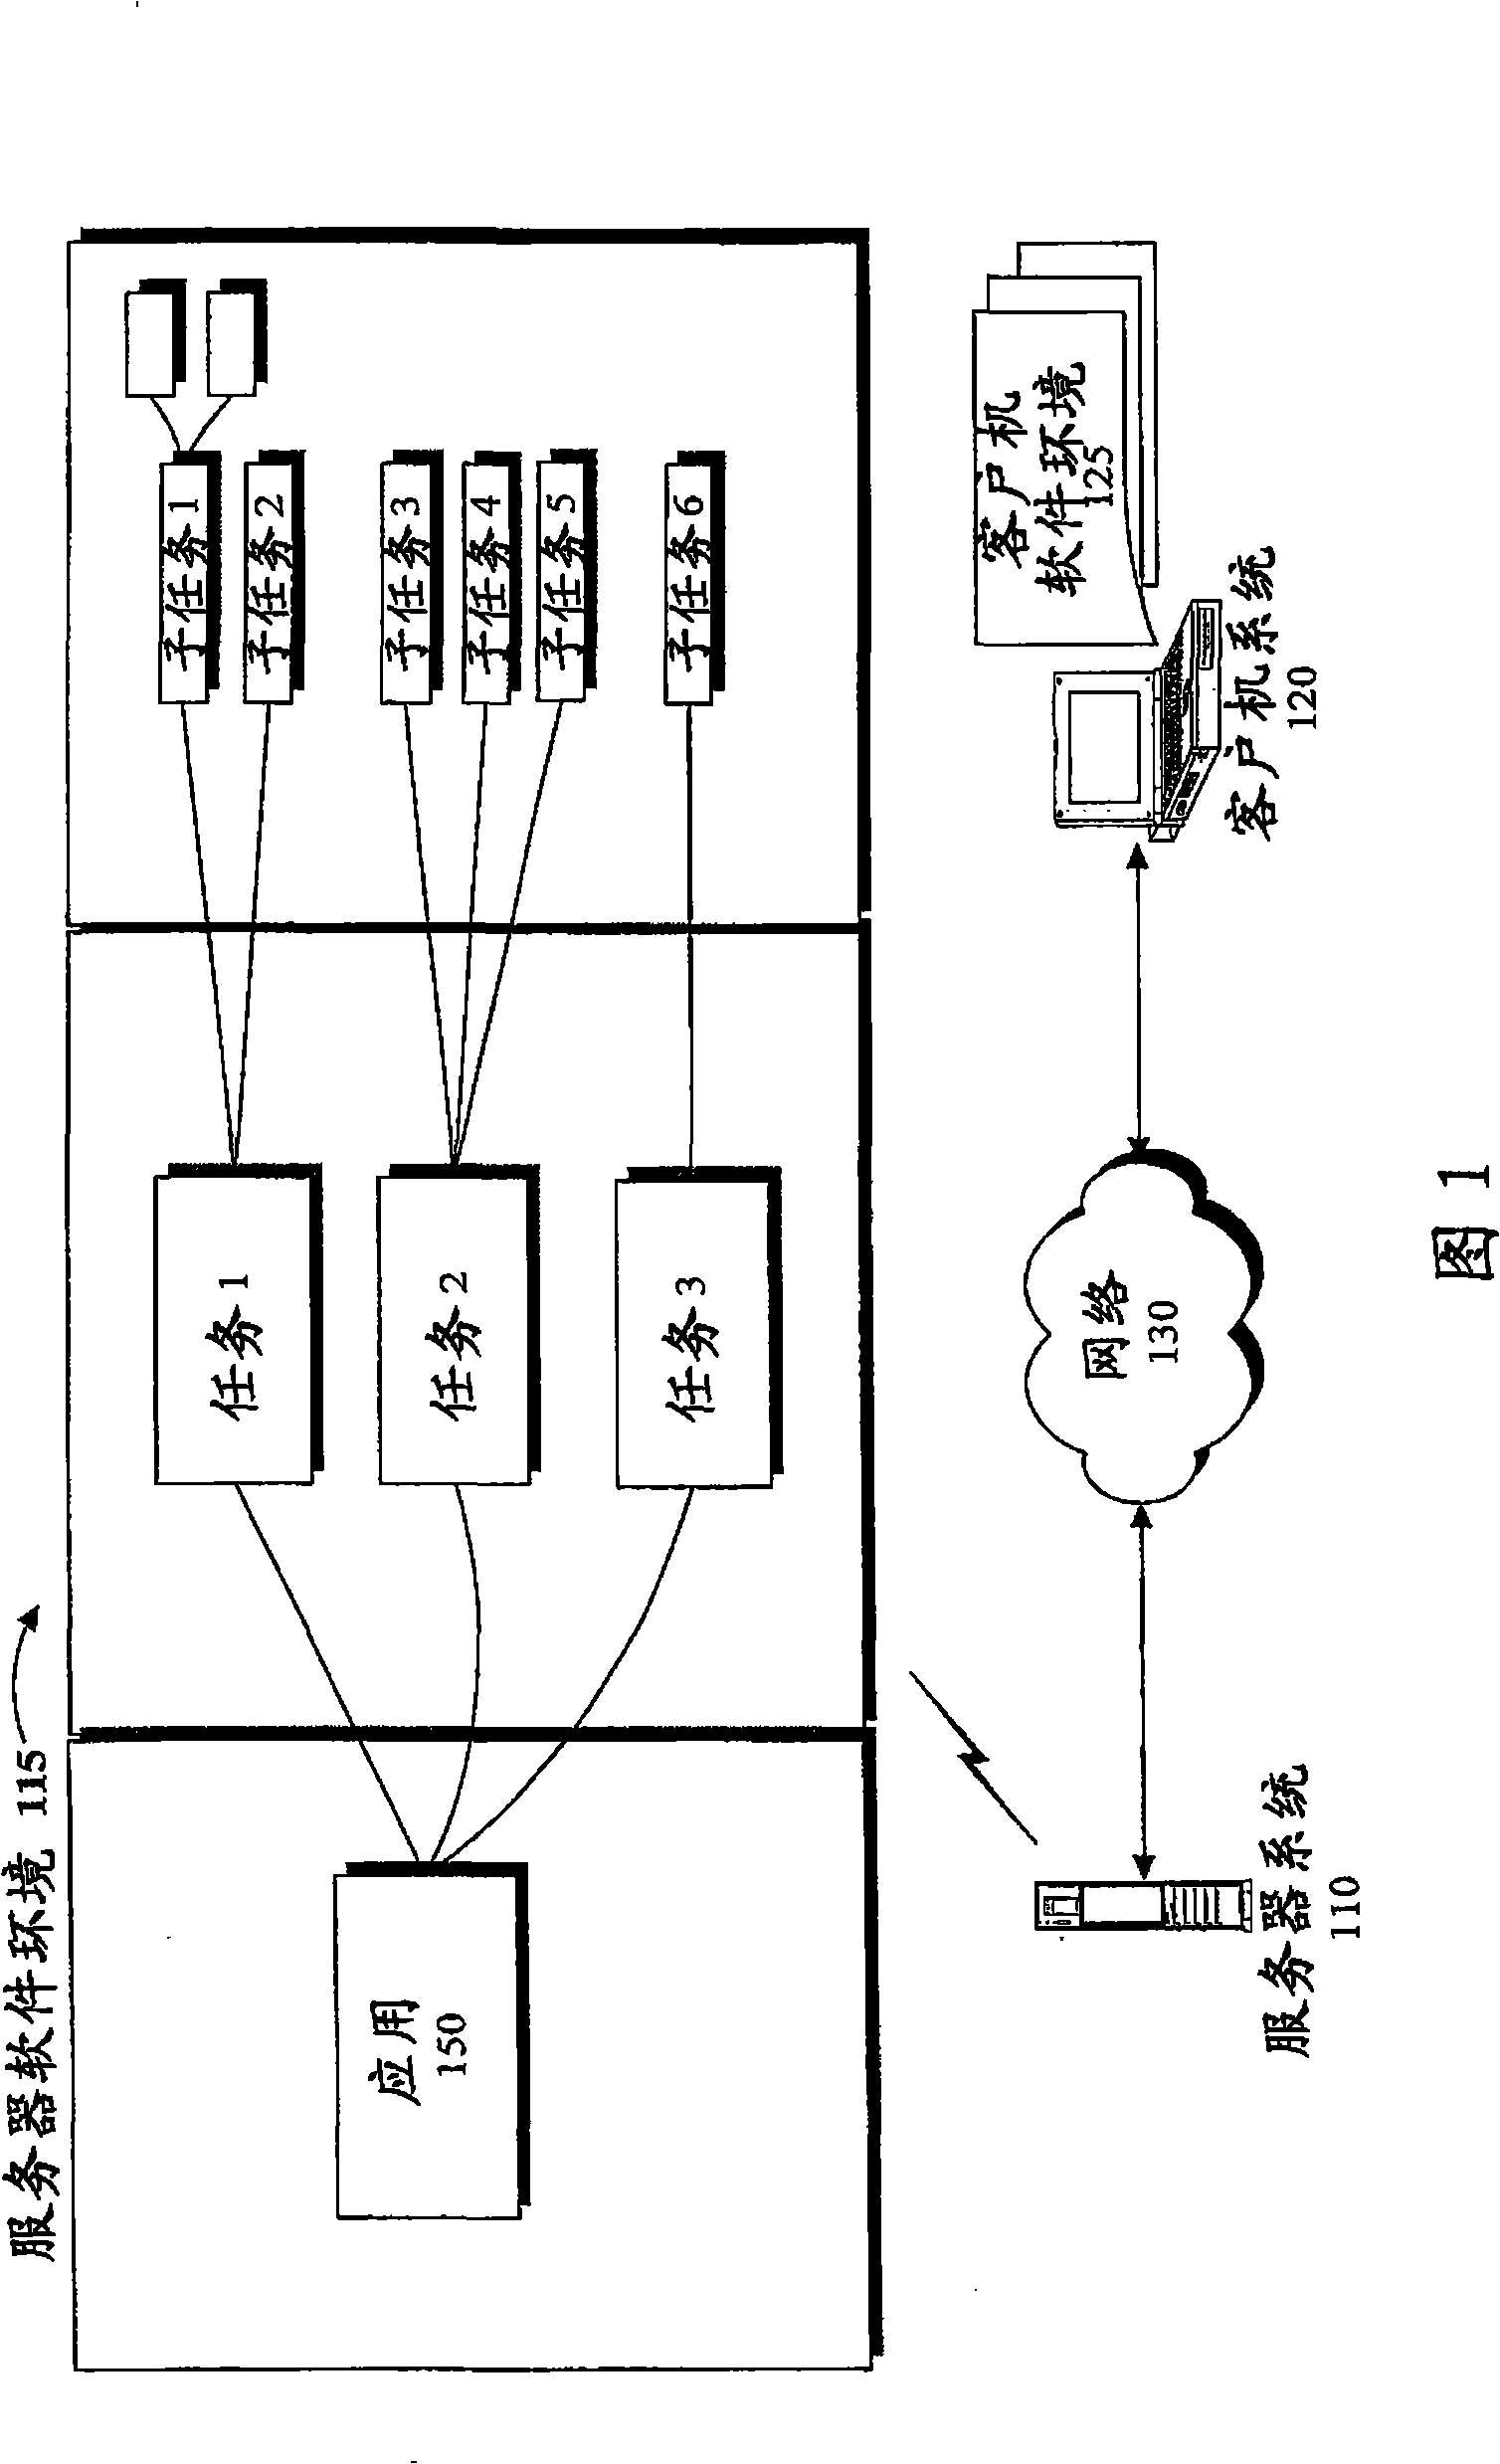 System and method for performing memory management in a computing environment